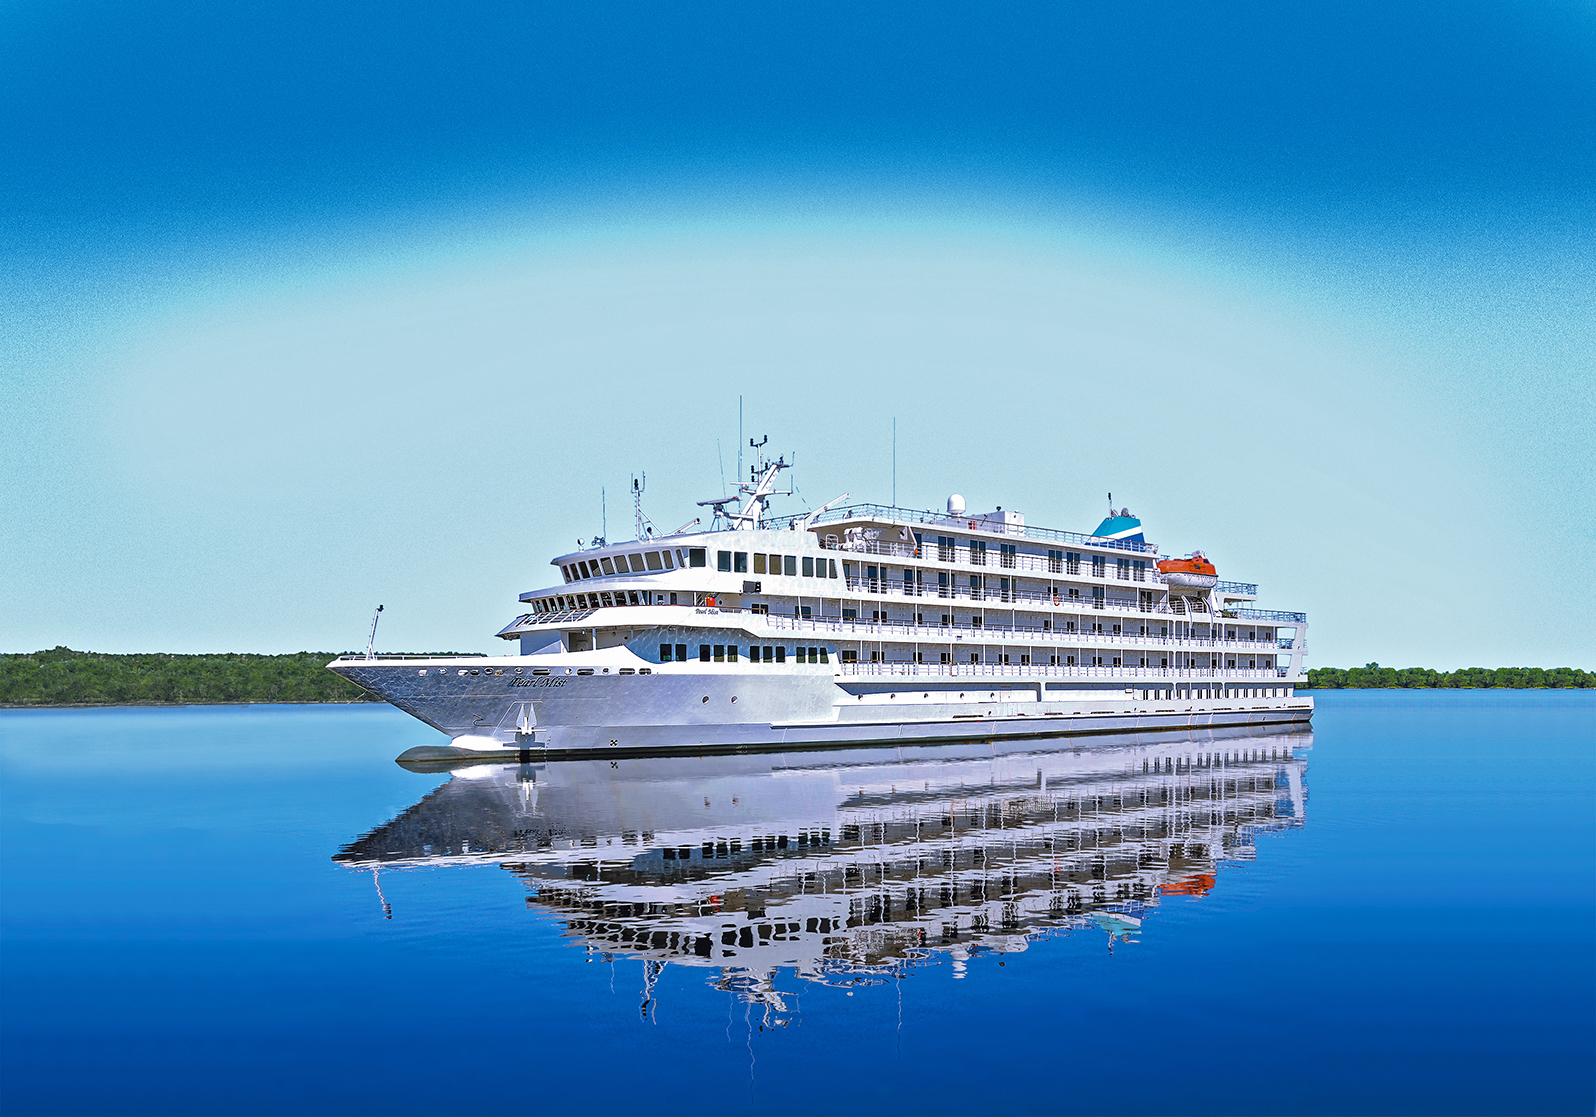 Toledo misses the boat Port authority uninterested as fleet of cruises launches on Great Lakes